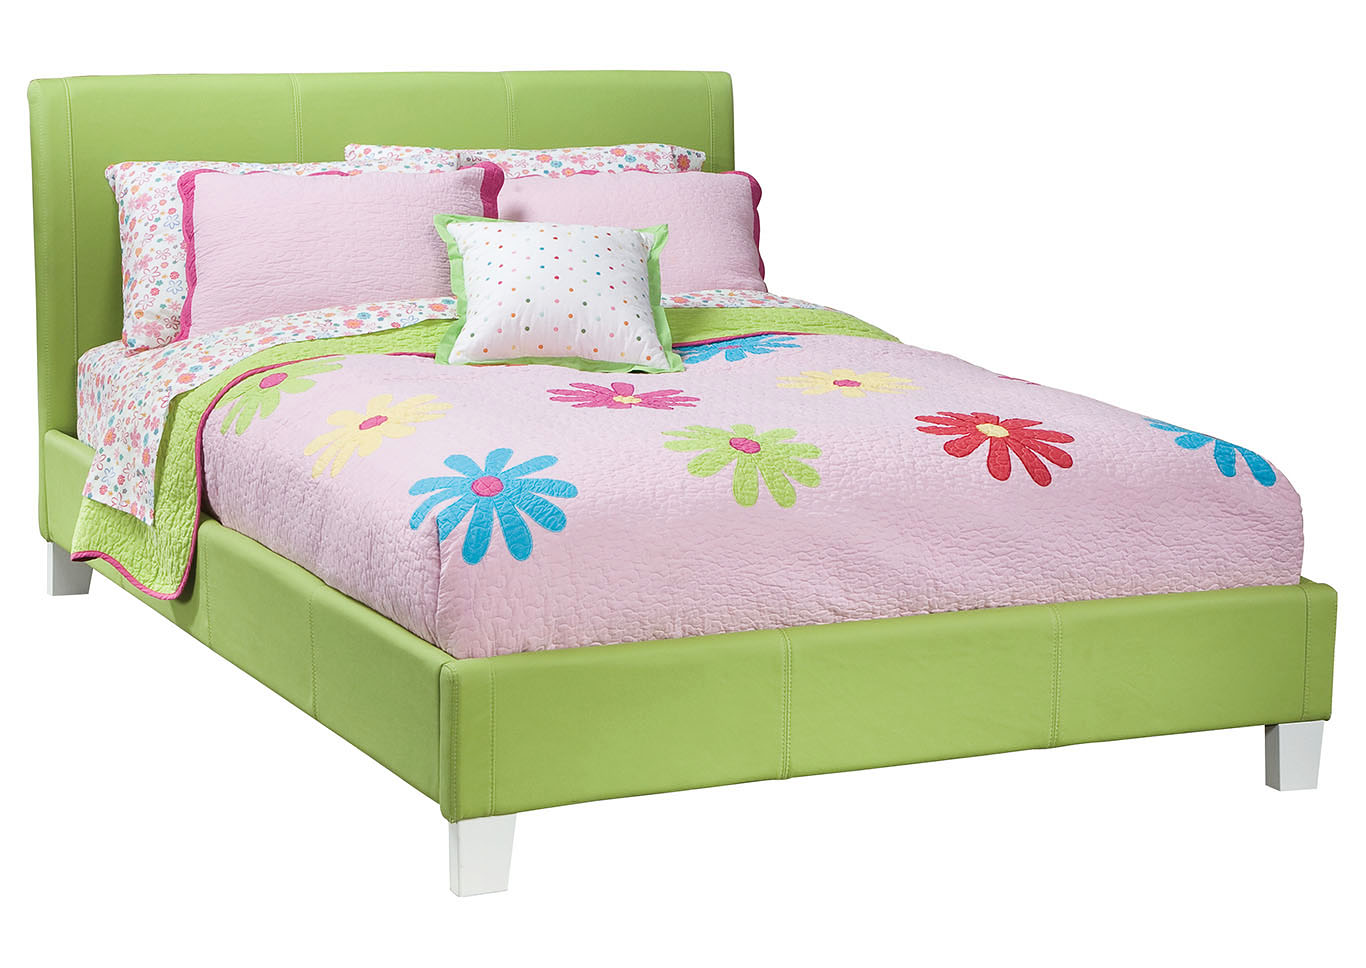 Fantasia Green Twin Upholstered Bed,Standard